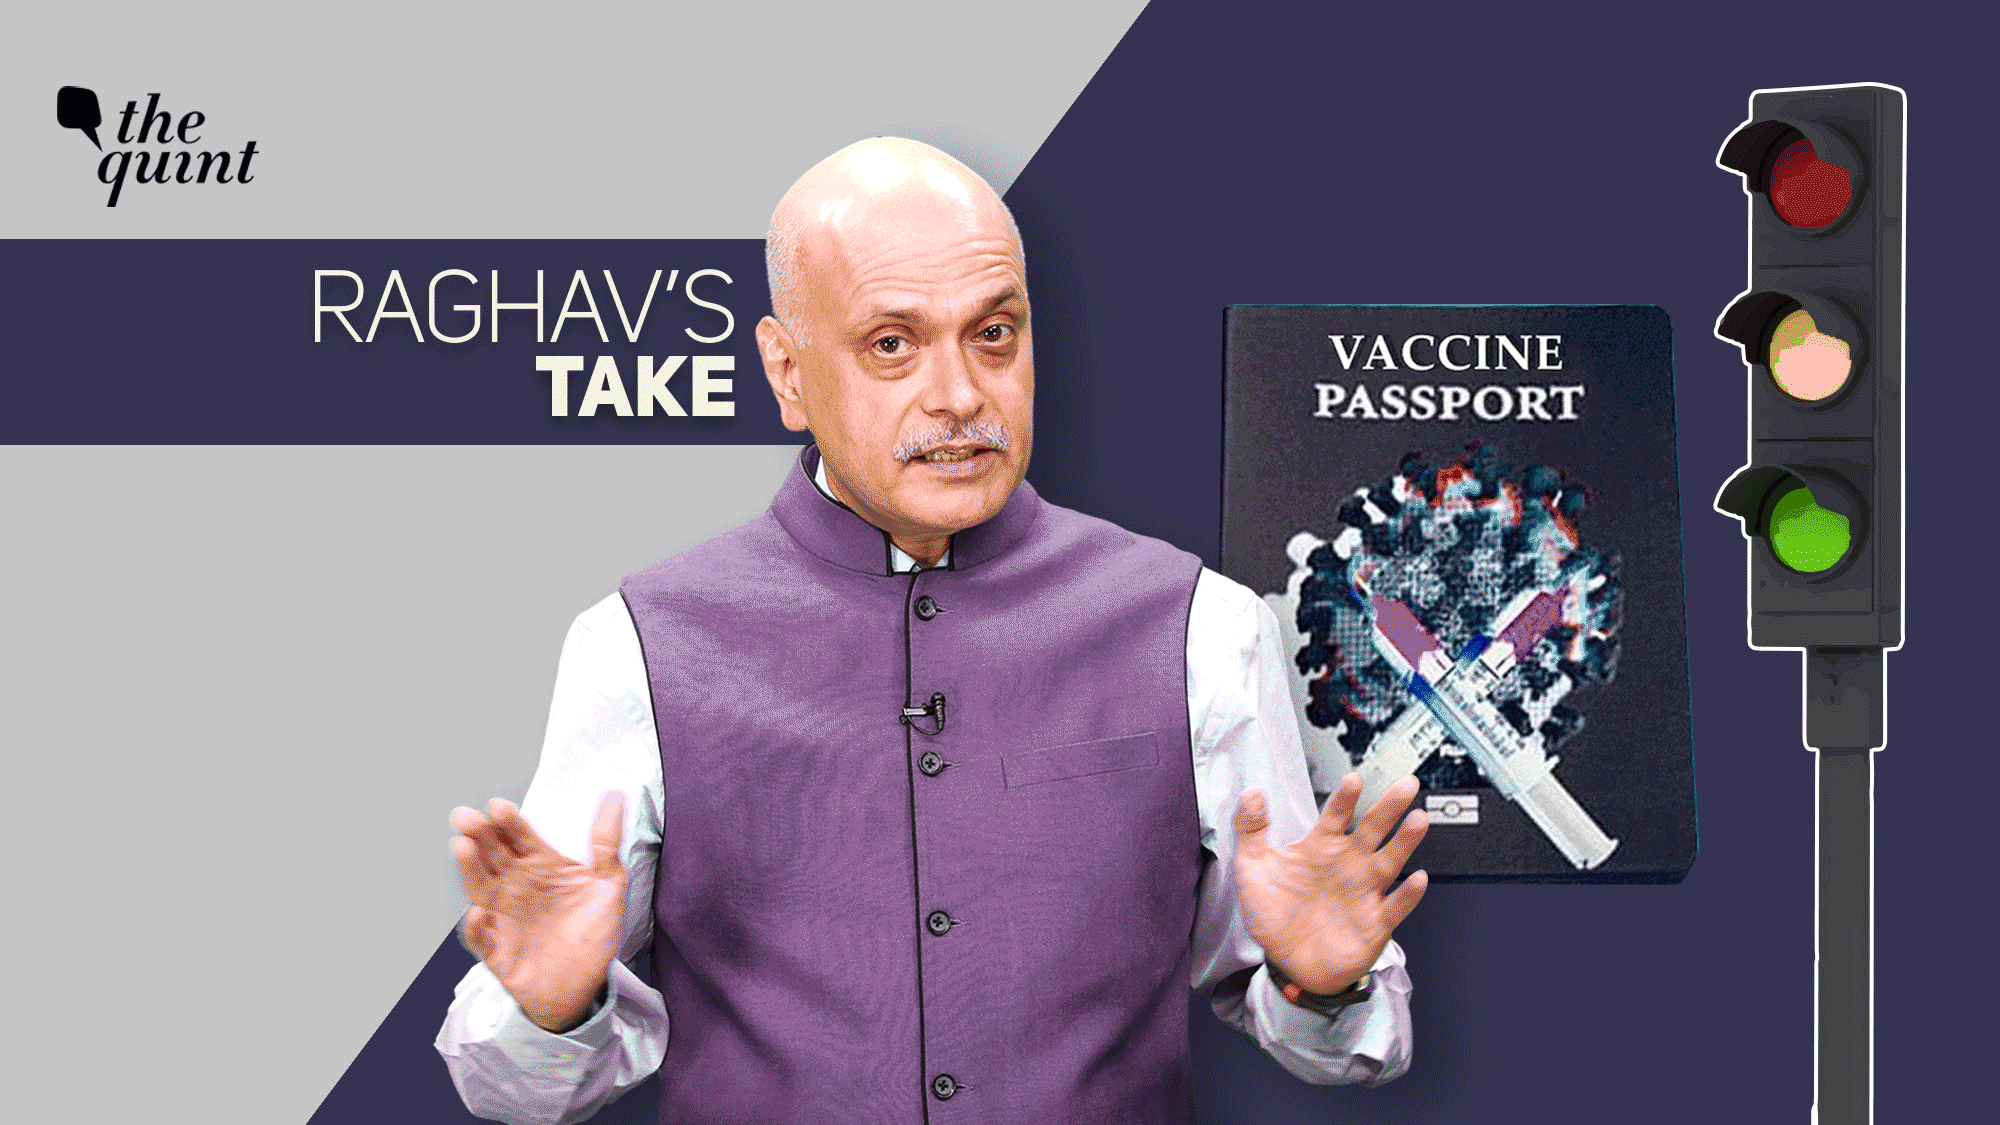 Image of The Quint’s Co-founder &amp; Editor-in-Chief Raghav Bahl, used for representational purposes.